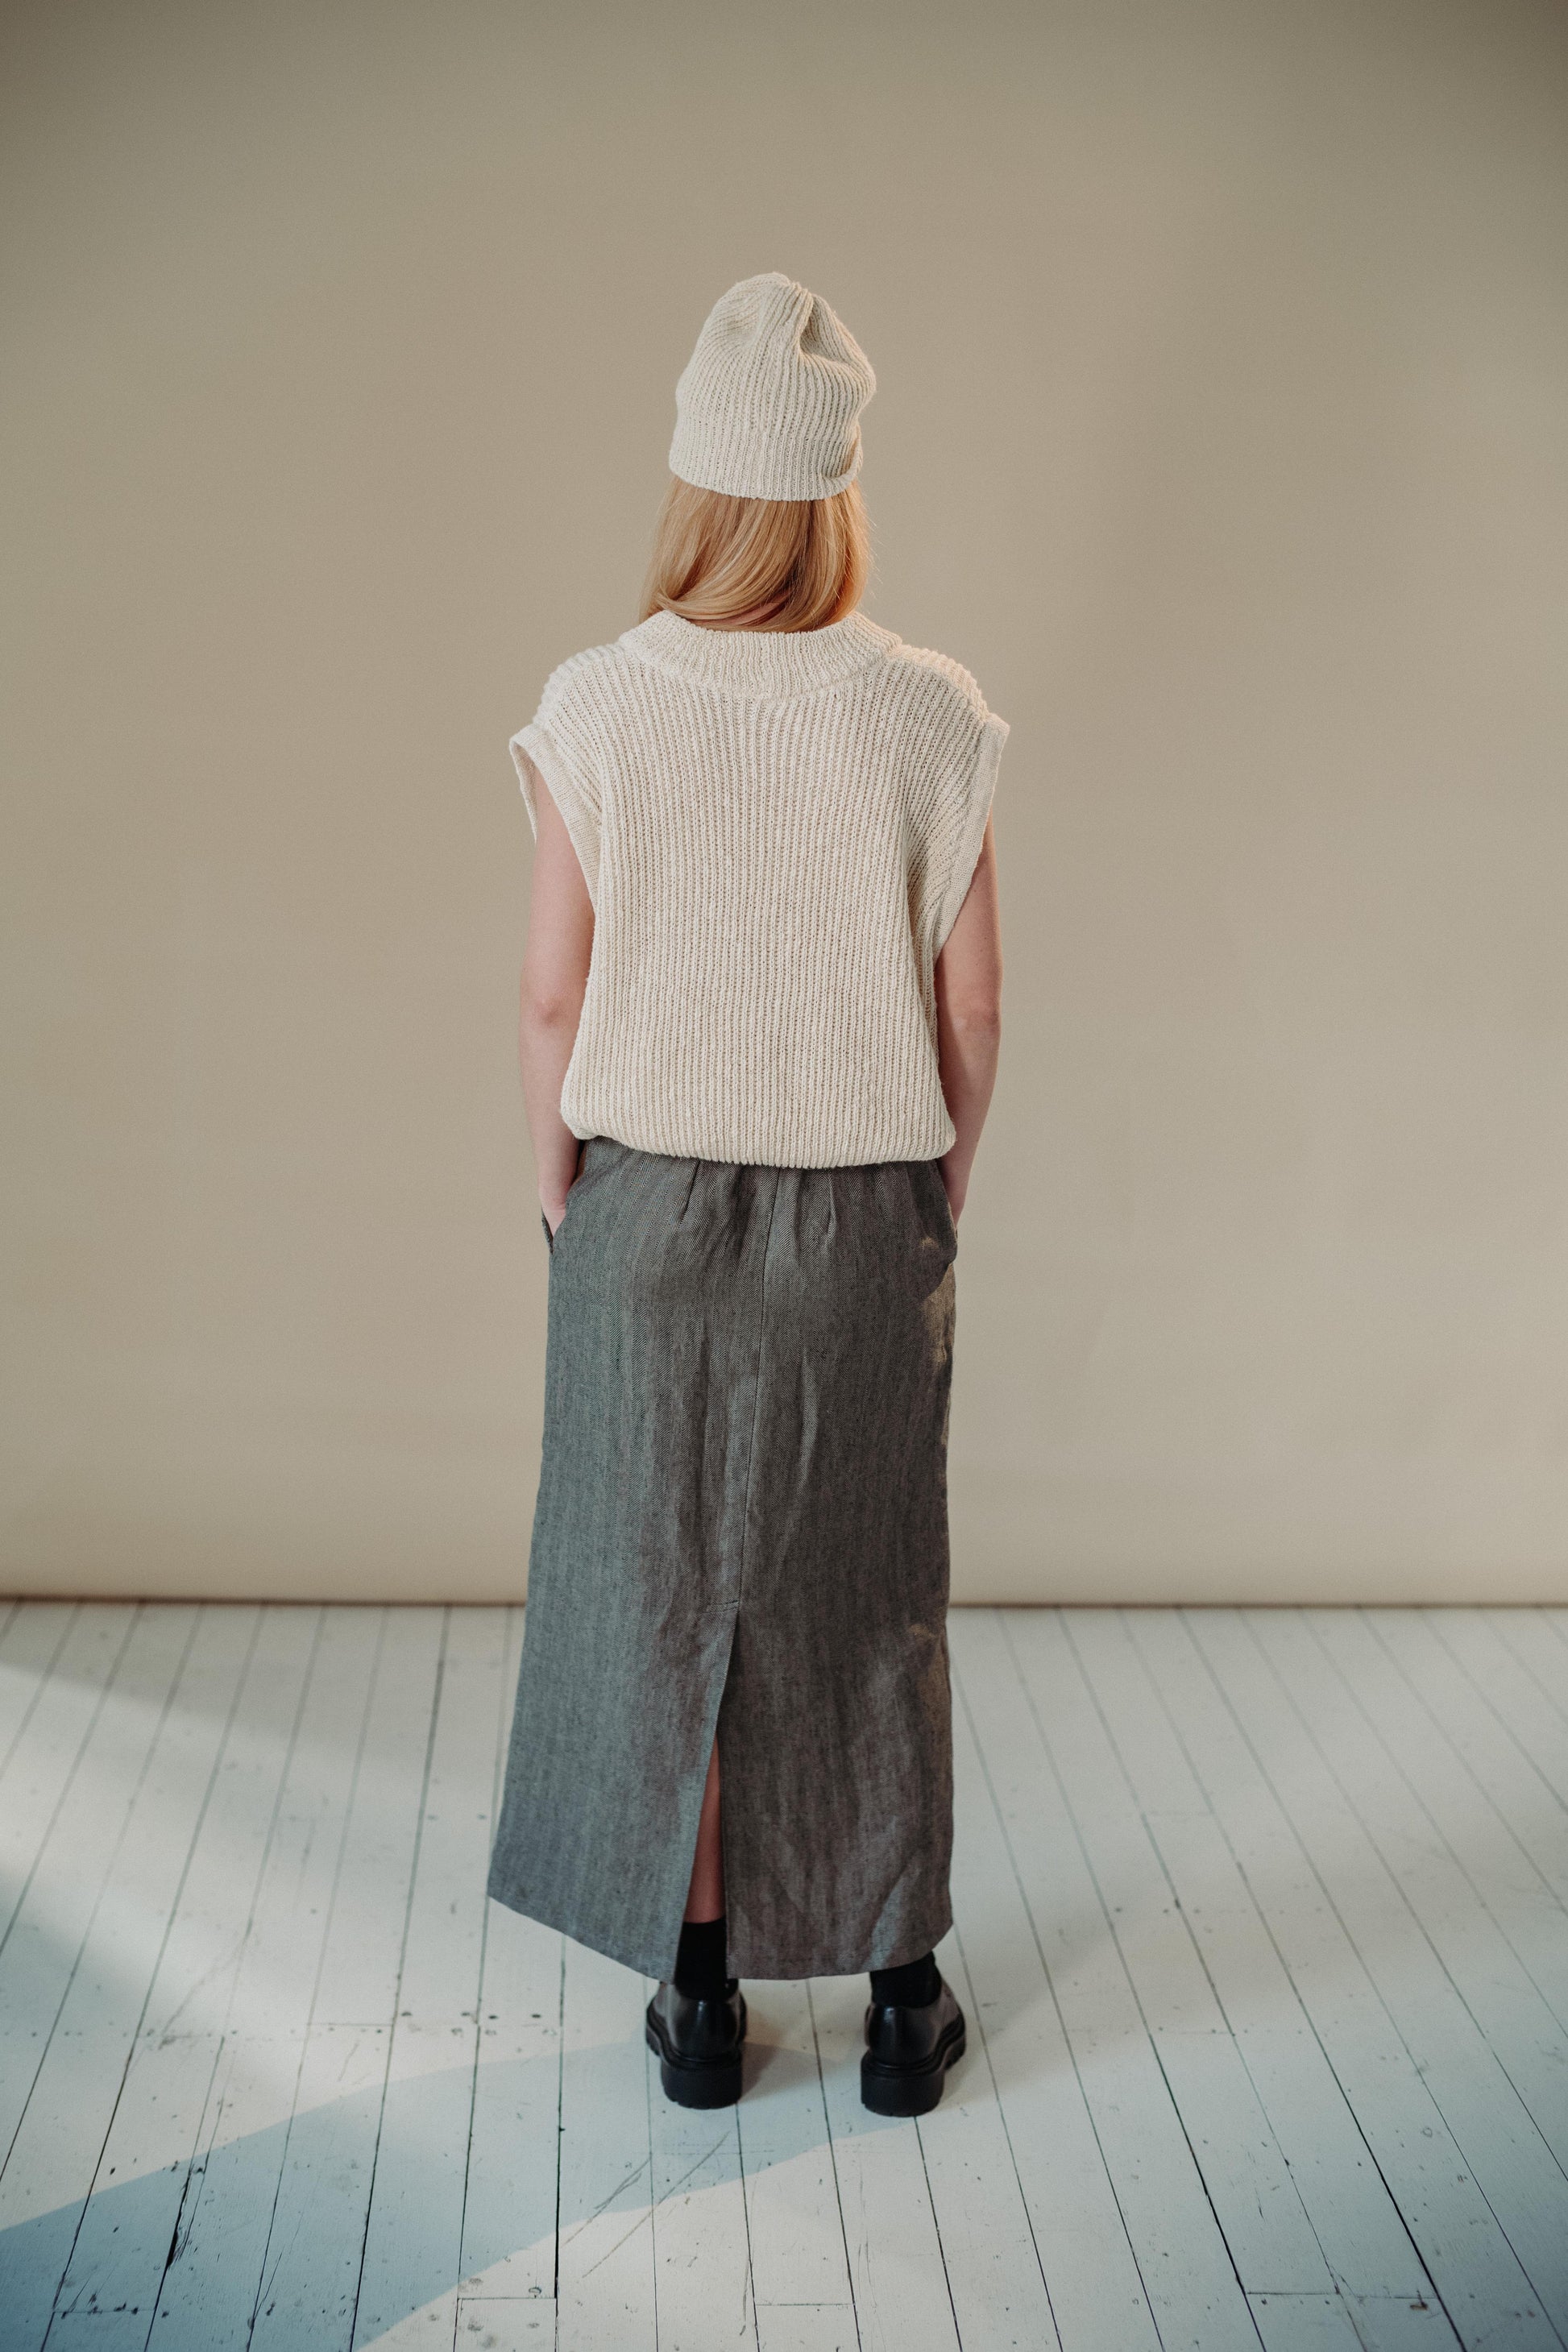 HERRINGBONE SKIRT | The herringbone skirt is based off one of Amy's favourite vintage skirts. The simple long line silhouette will add an elegant look to your winter knits and shirts. Dress up with heels or contrast with a sneaker. Created with a lovely h